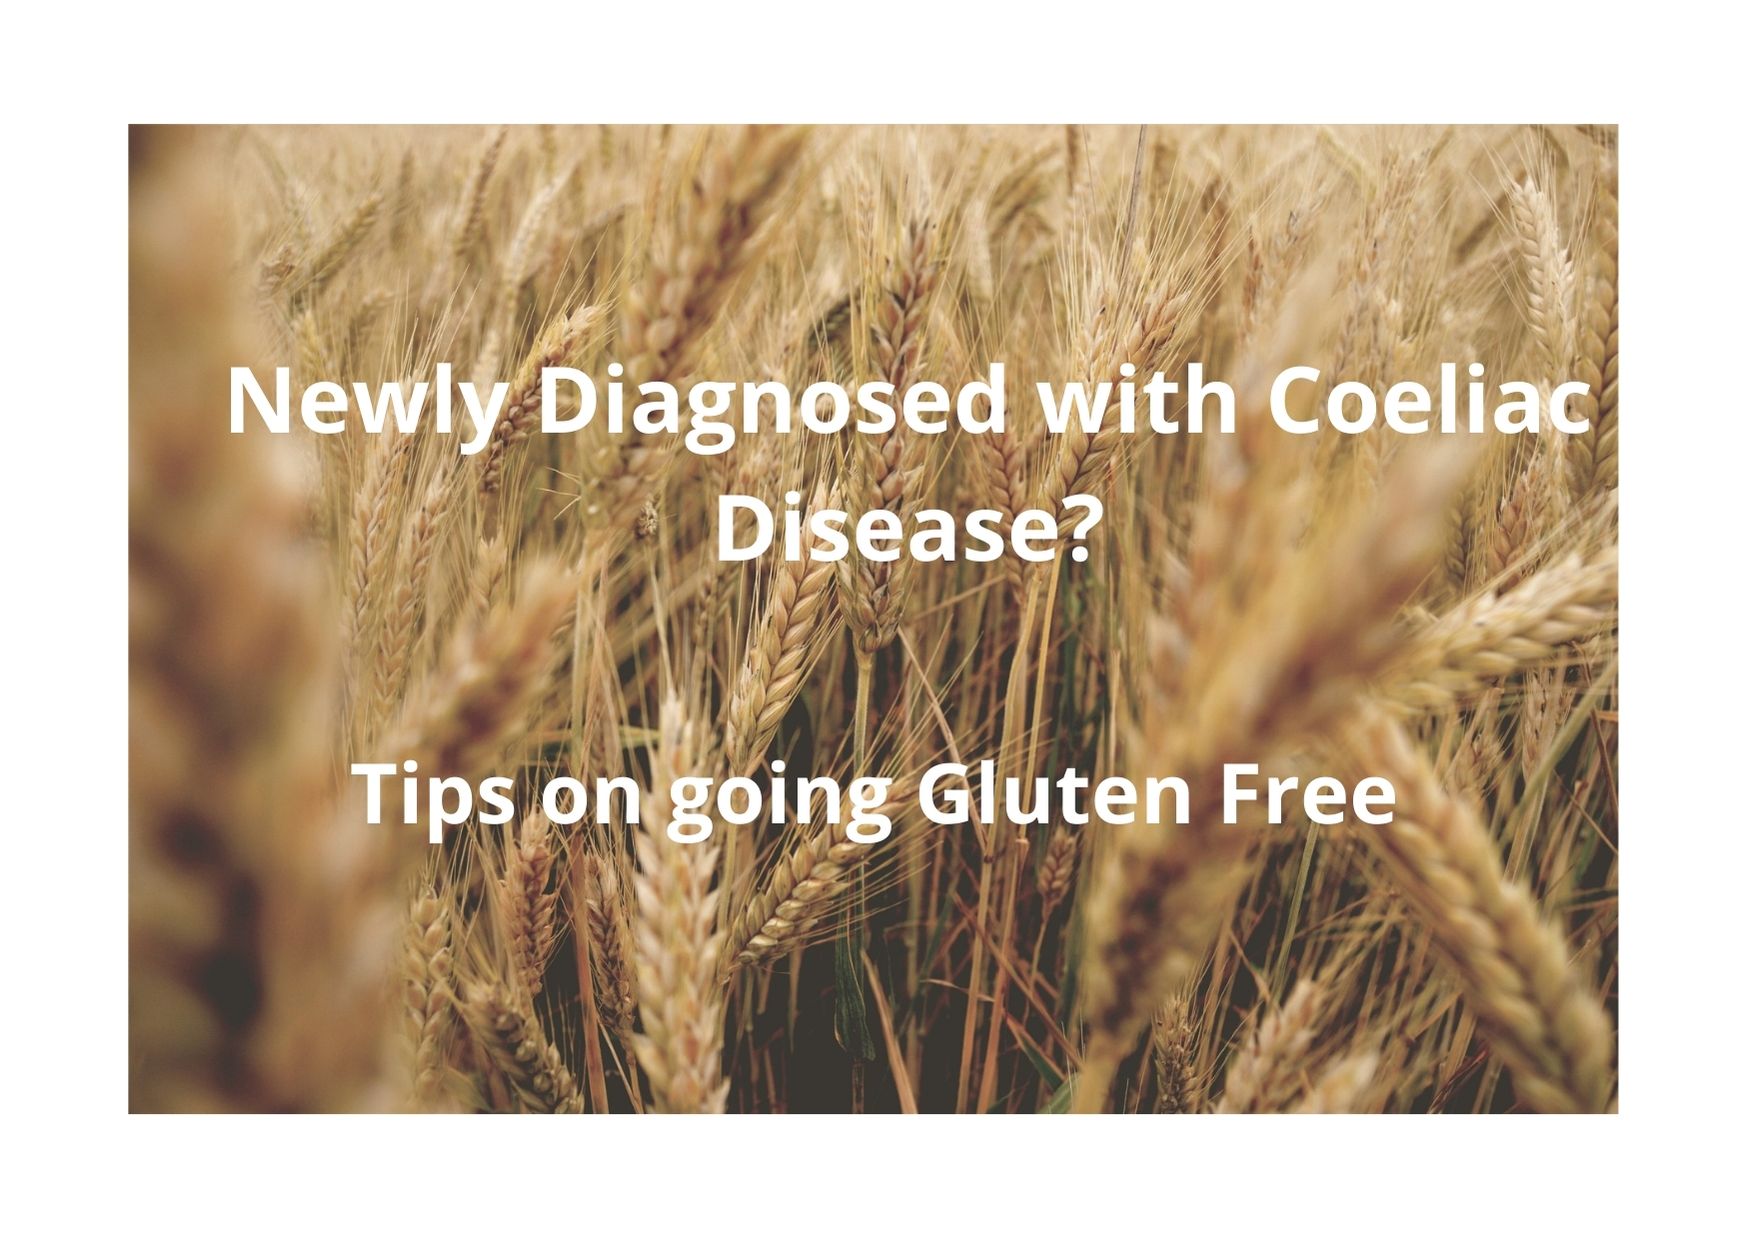 Newly diagnosed with Coeliac Disease?